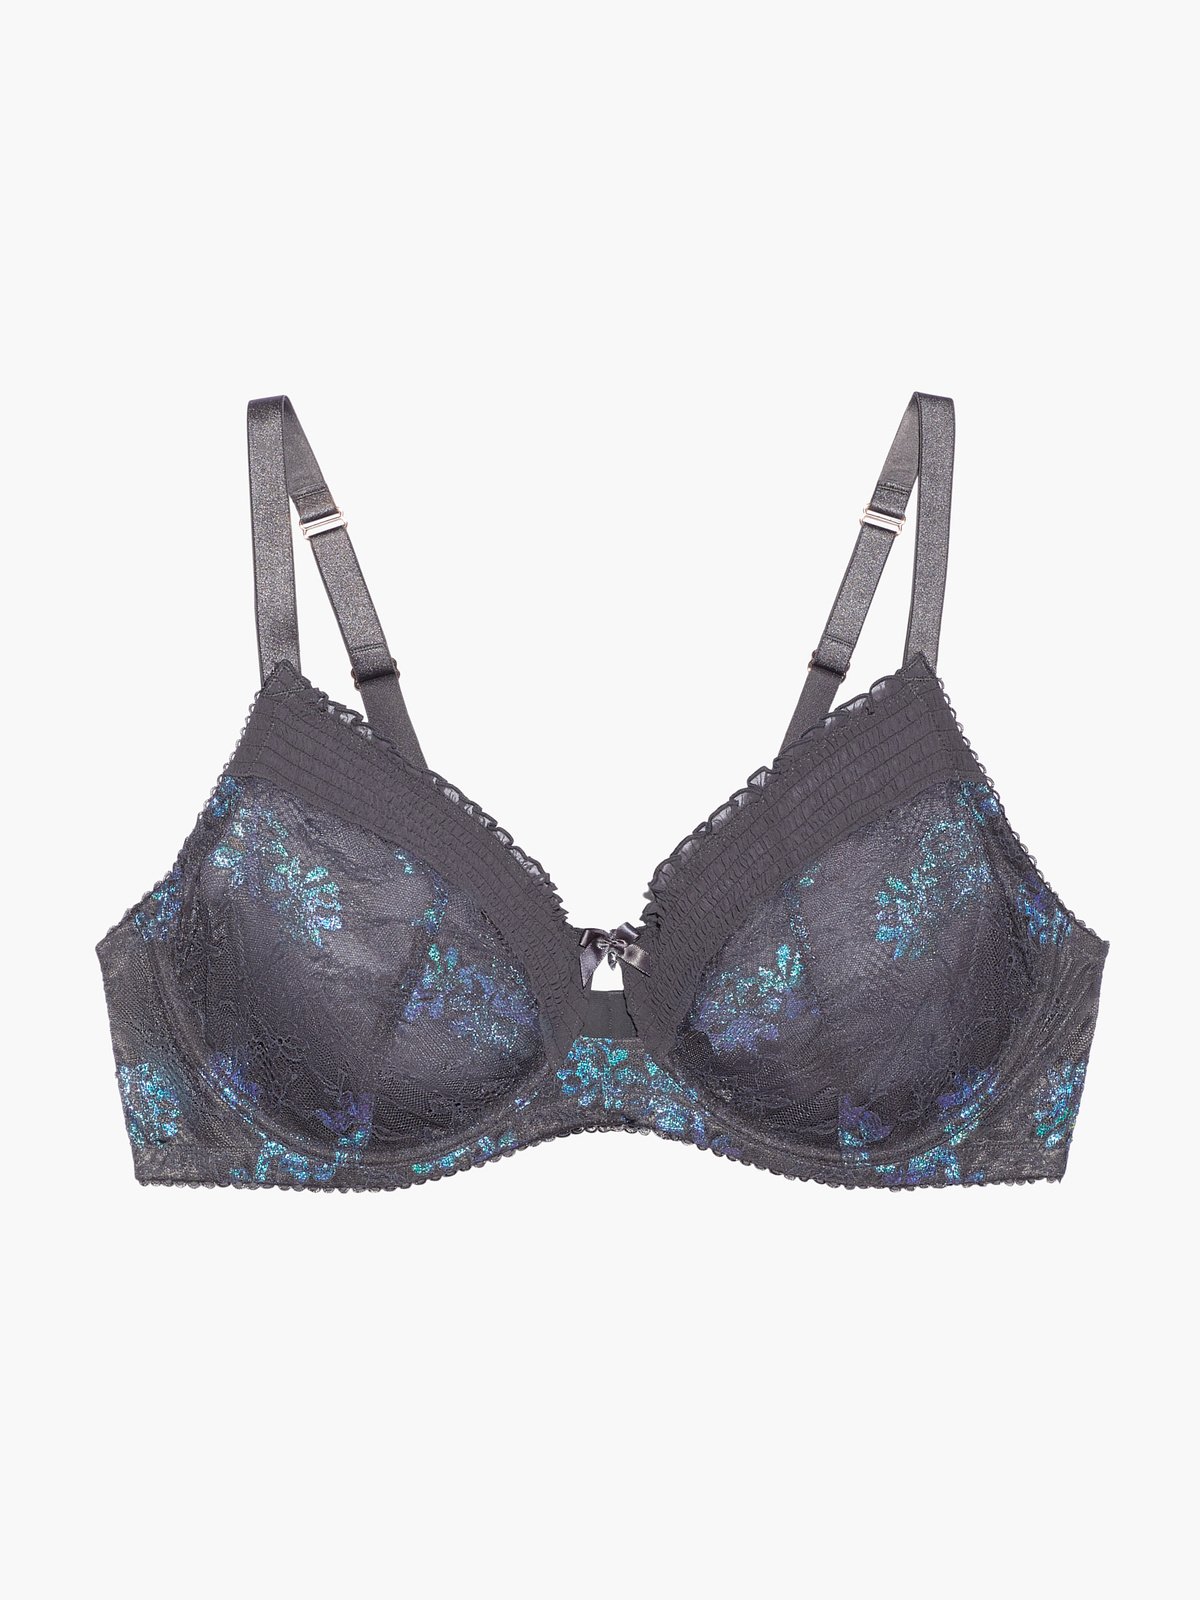 Living in the Clouds Iridescent Lace Unlined Bra in Grey | SAVAGE X FENTY